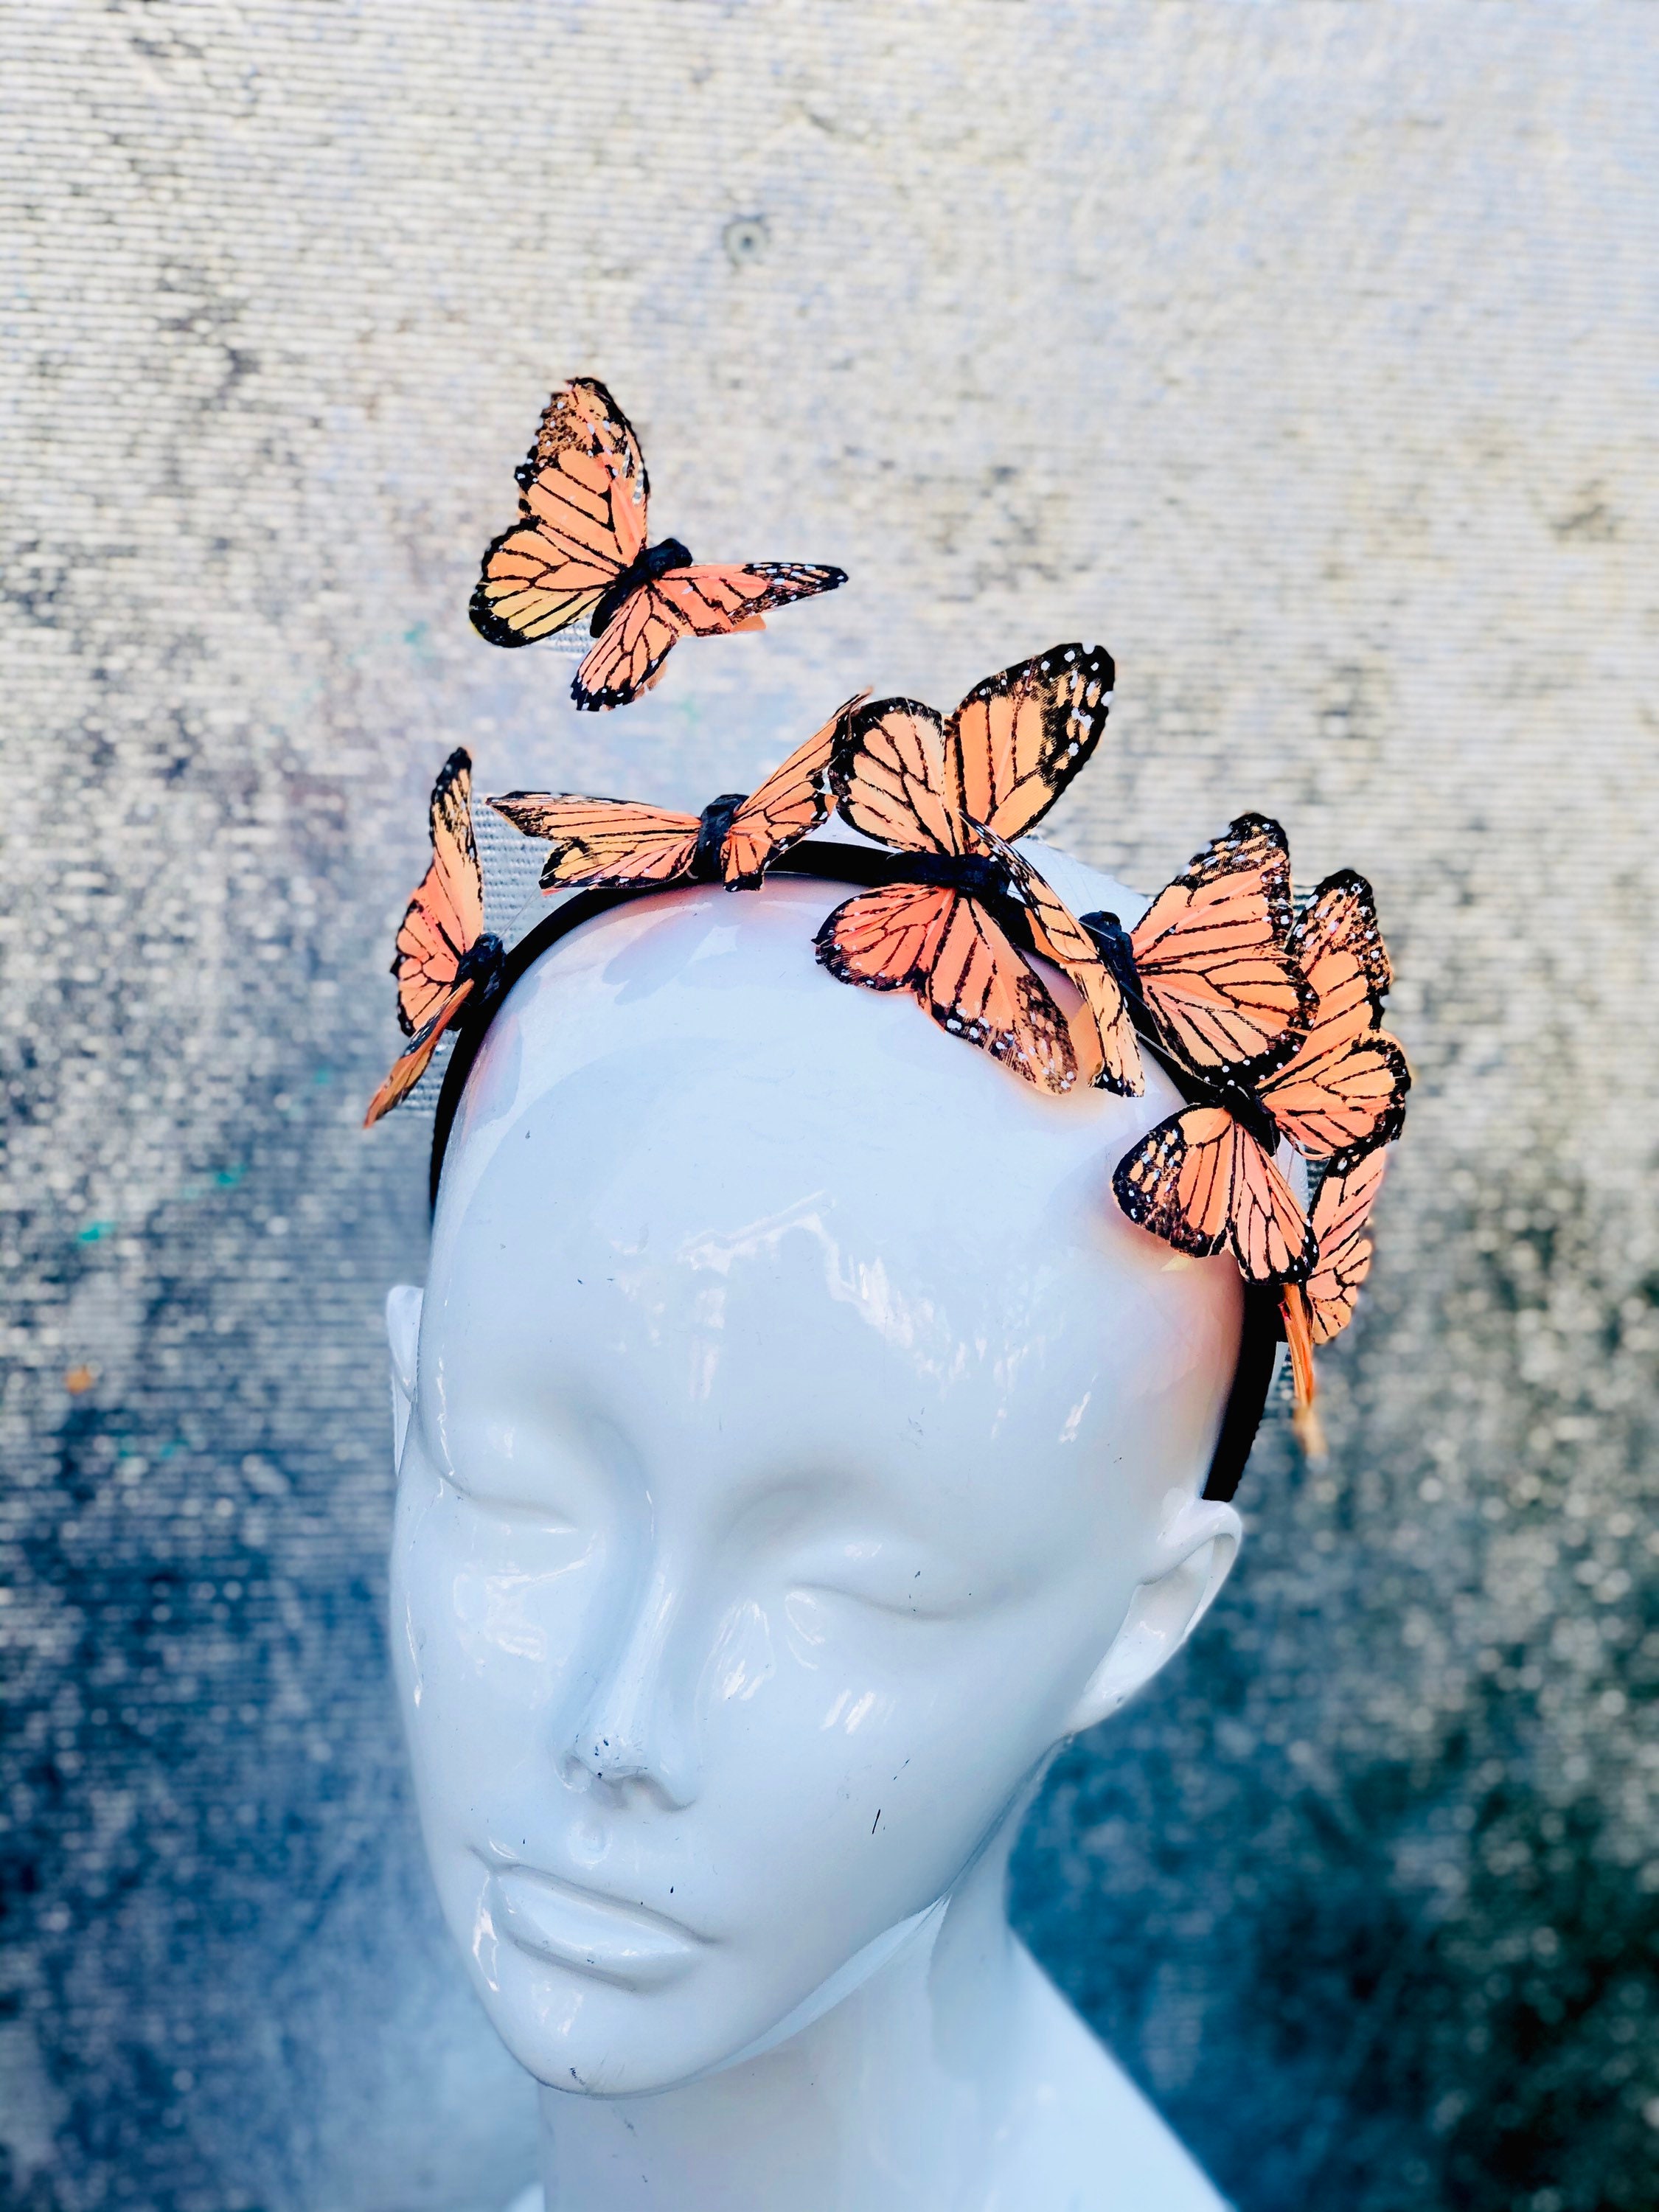 MIXT NZ art + design - These cute Monarch butterfly decorations have sold  out in Kingsland and we only have a few left in Devonport.